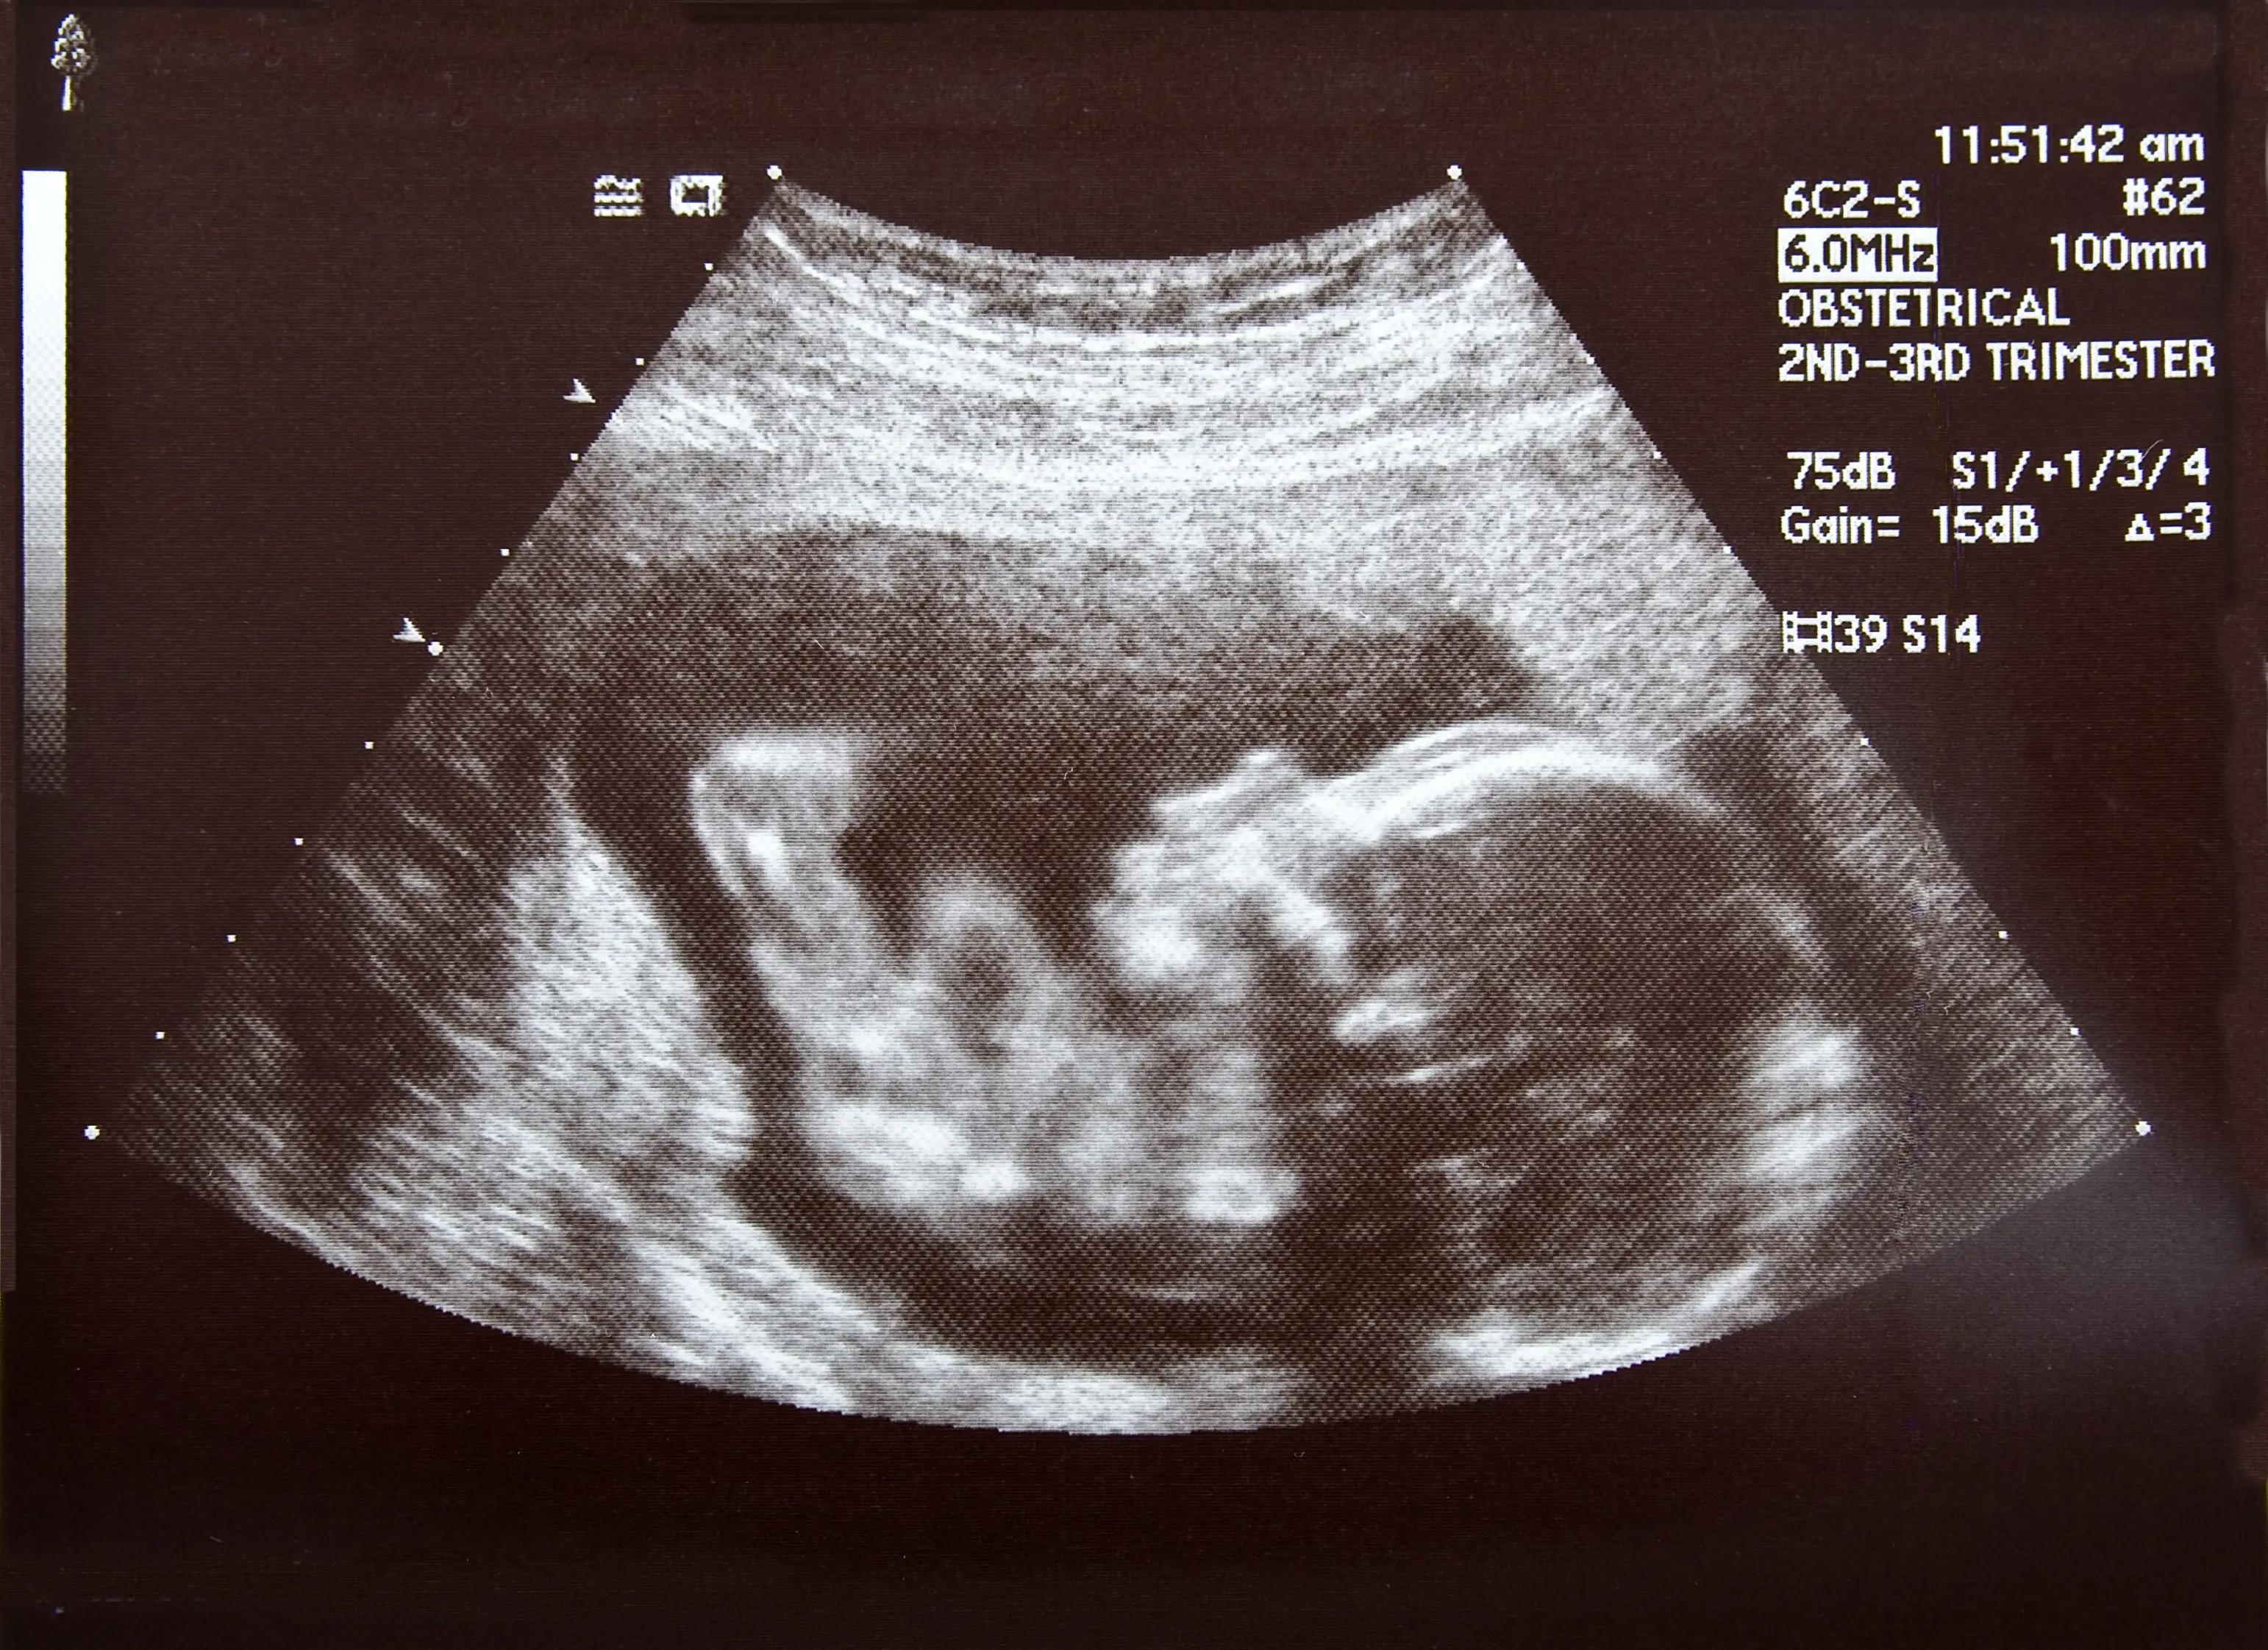 An ultrasound of a human fetus during the 17th week